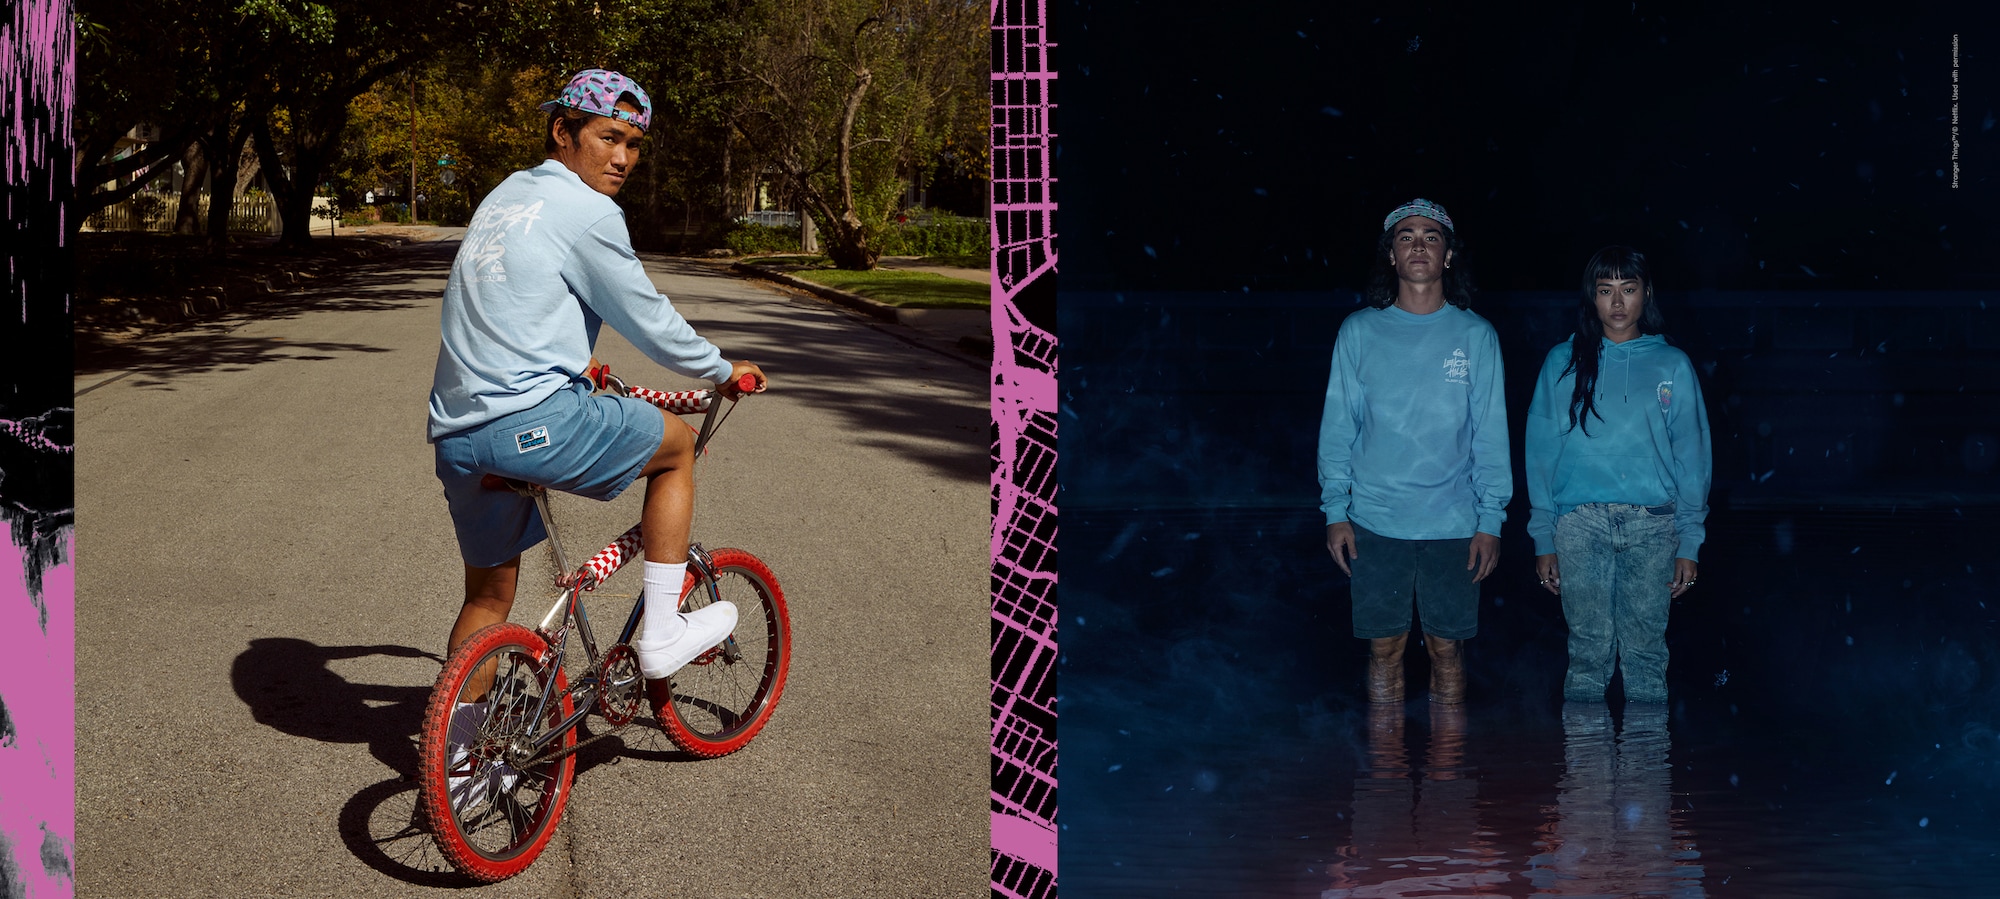 The collection Quiksilver x Stranger Things